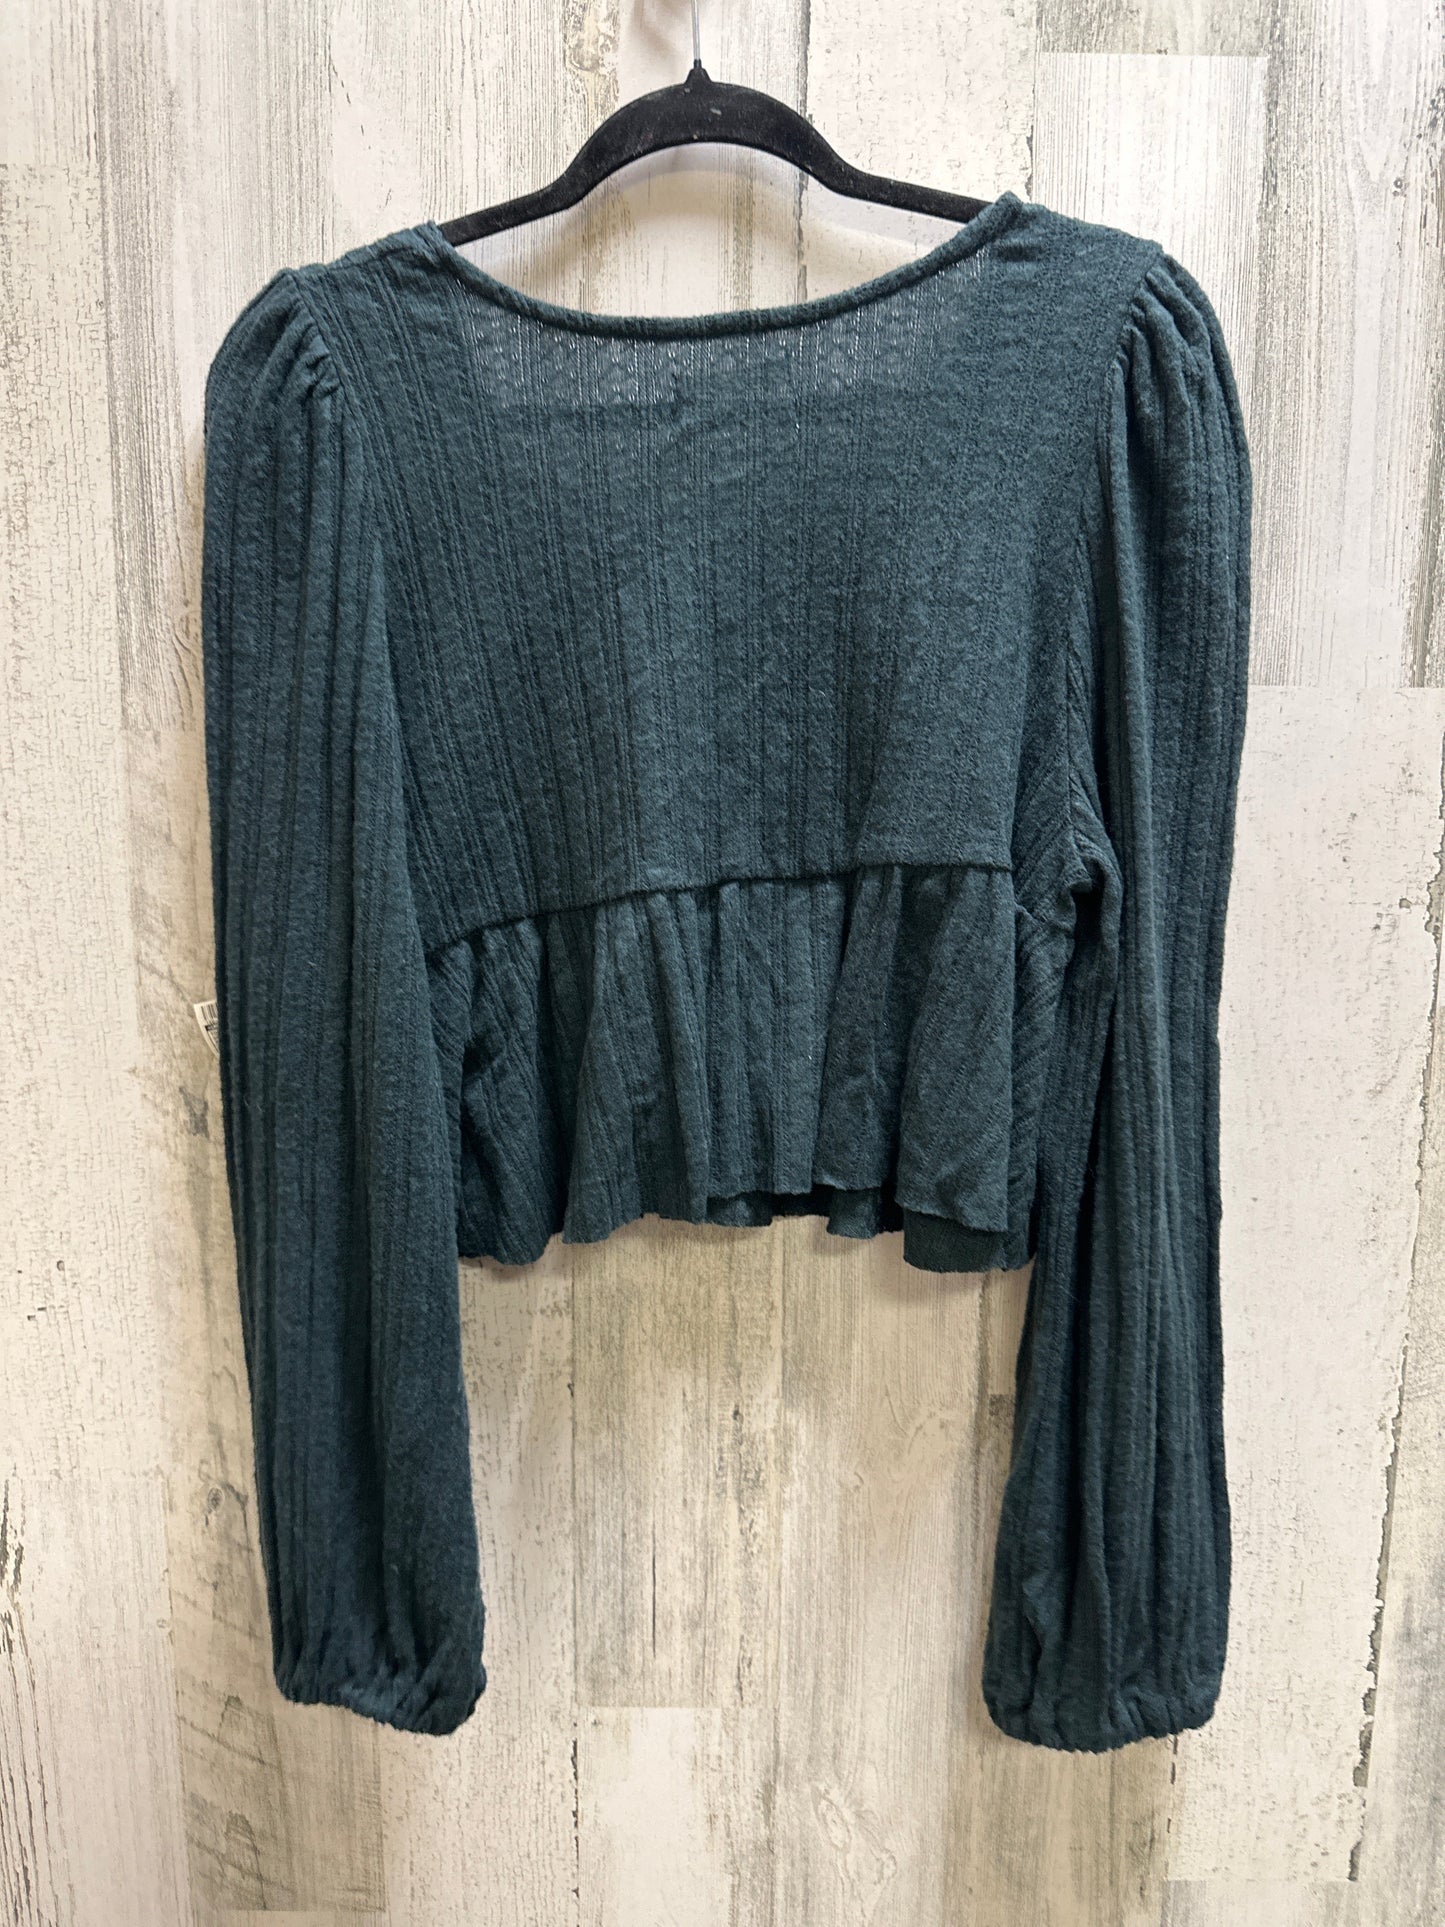 Green Top Long Sleeve Urban Outfitters, Size M